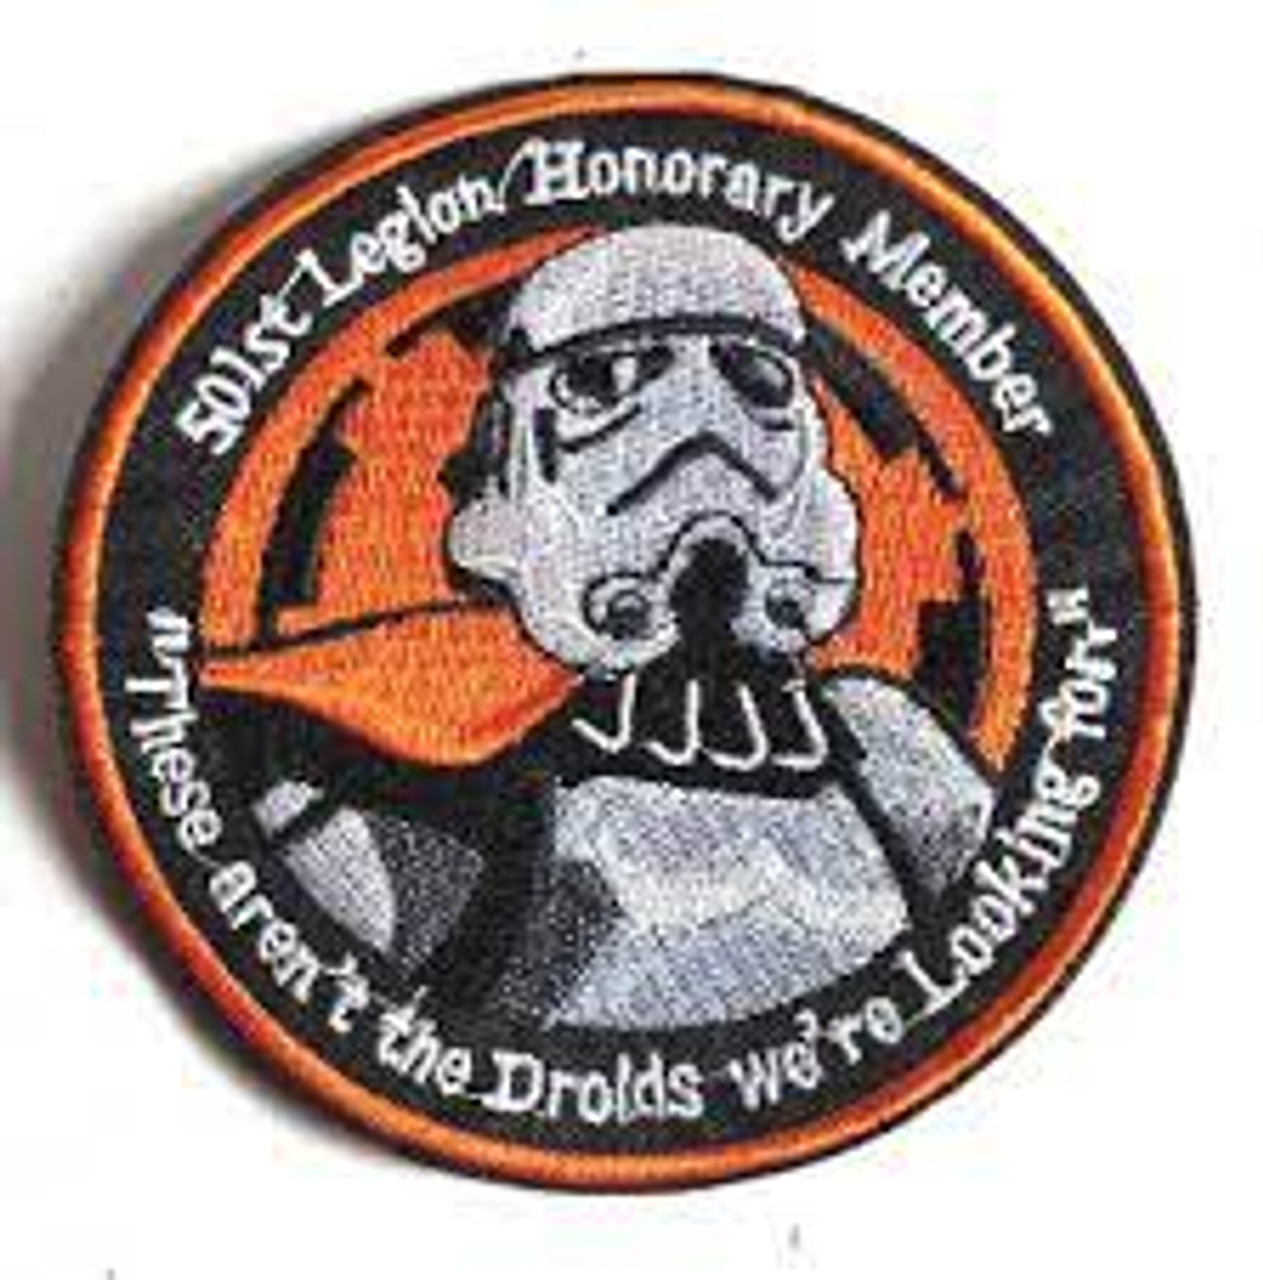 Star Wars Movie Storm Trooper badges Iron on Sew on Embroidered